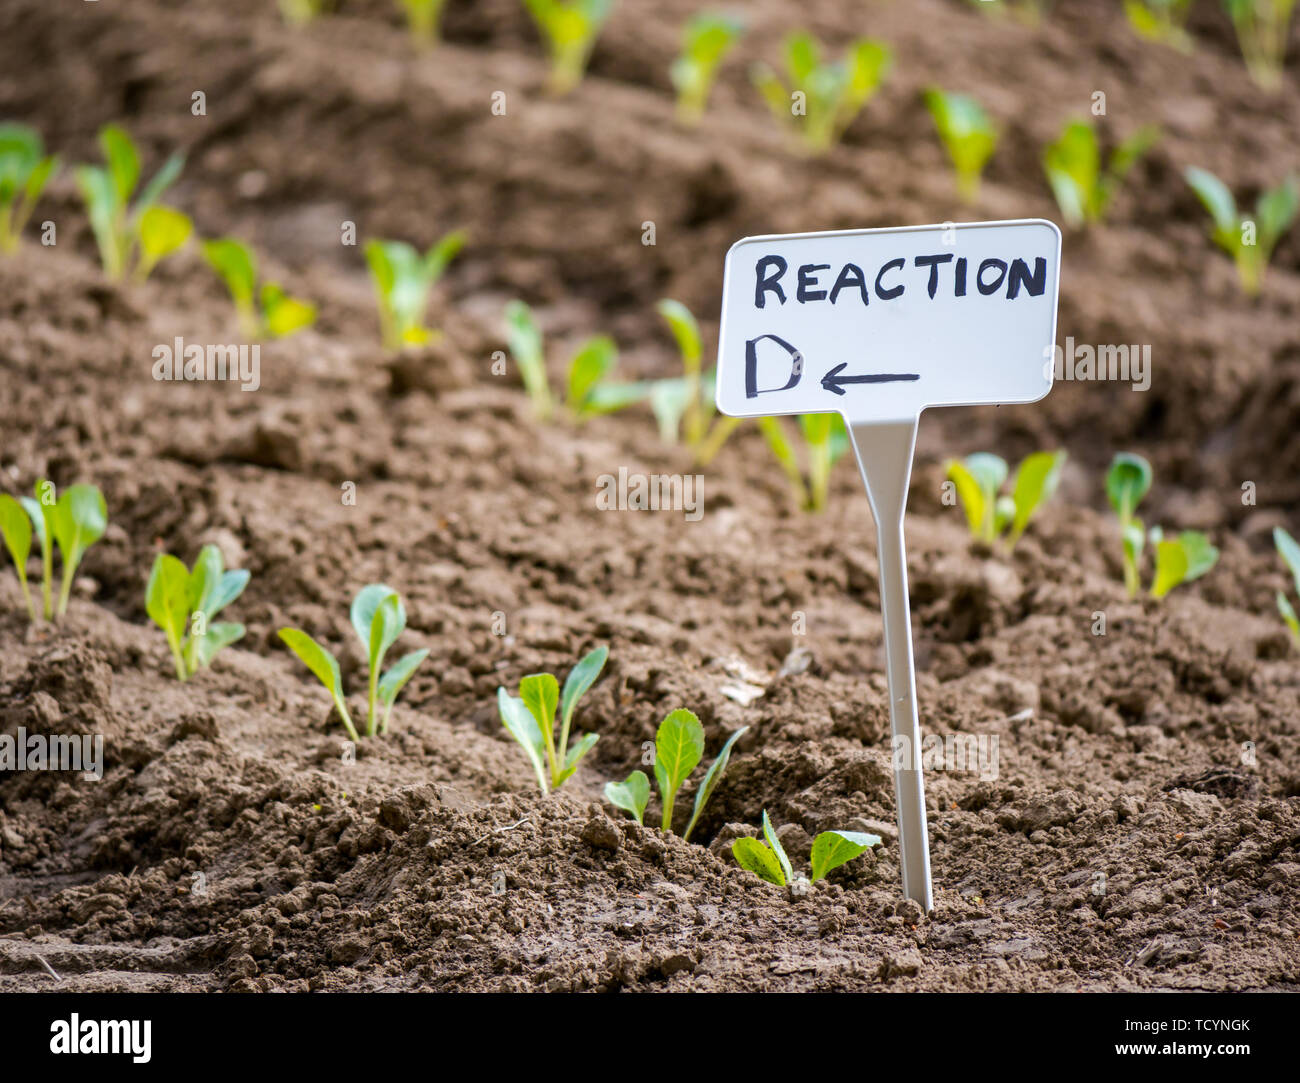 Crop labels in agricultural field planted with seedling, East Lothian, Scotland, UK Stock Photo